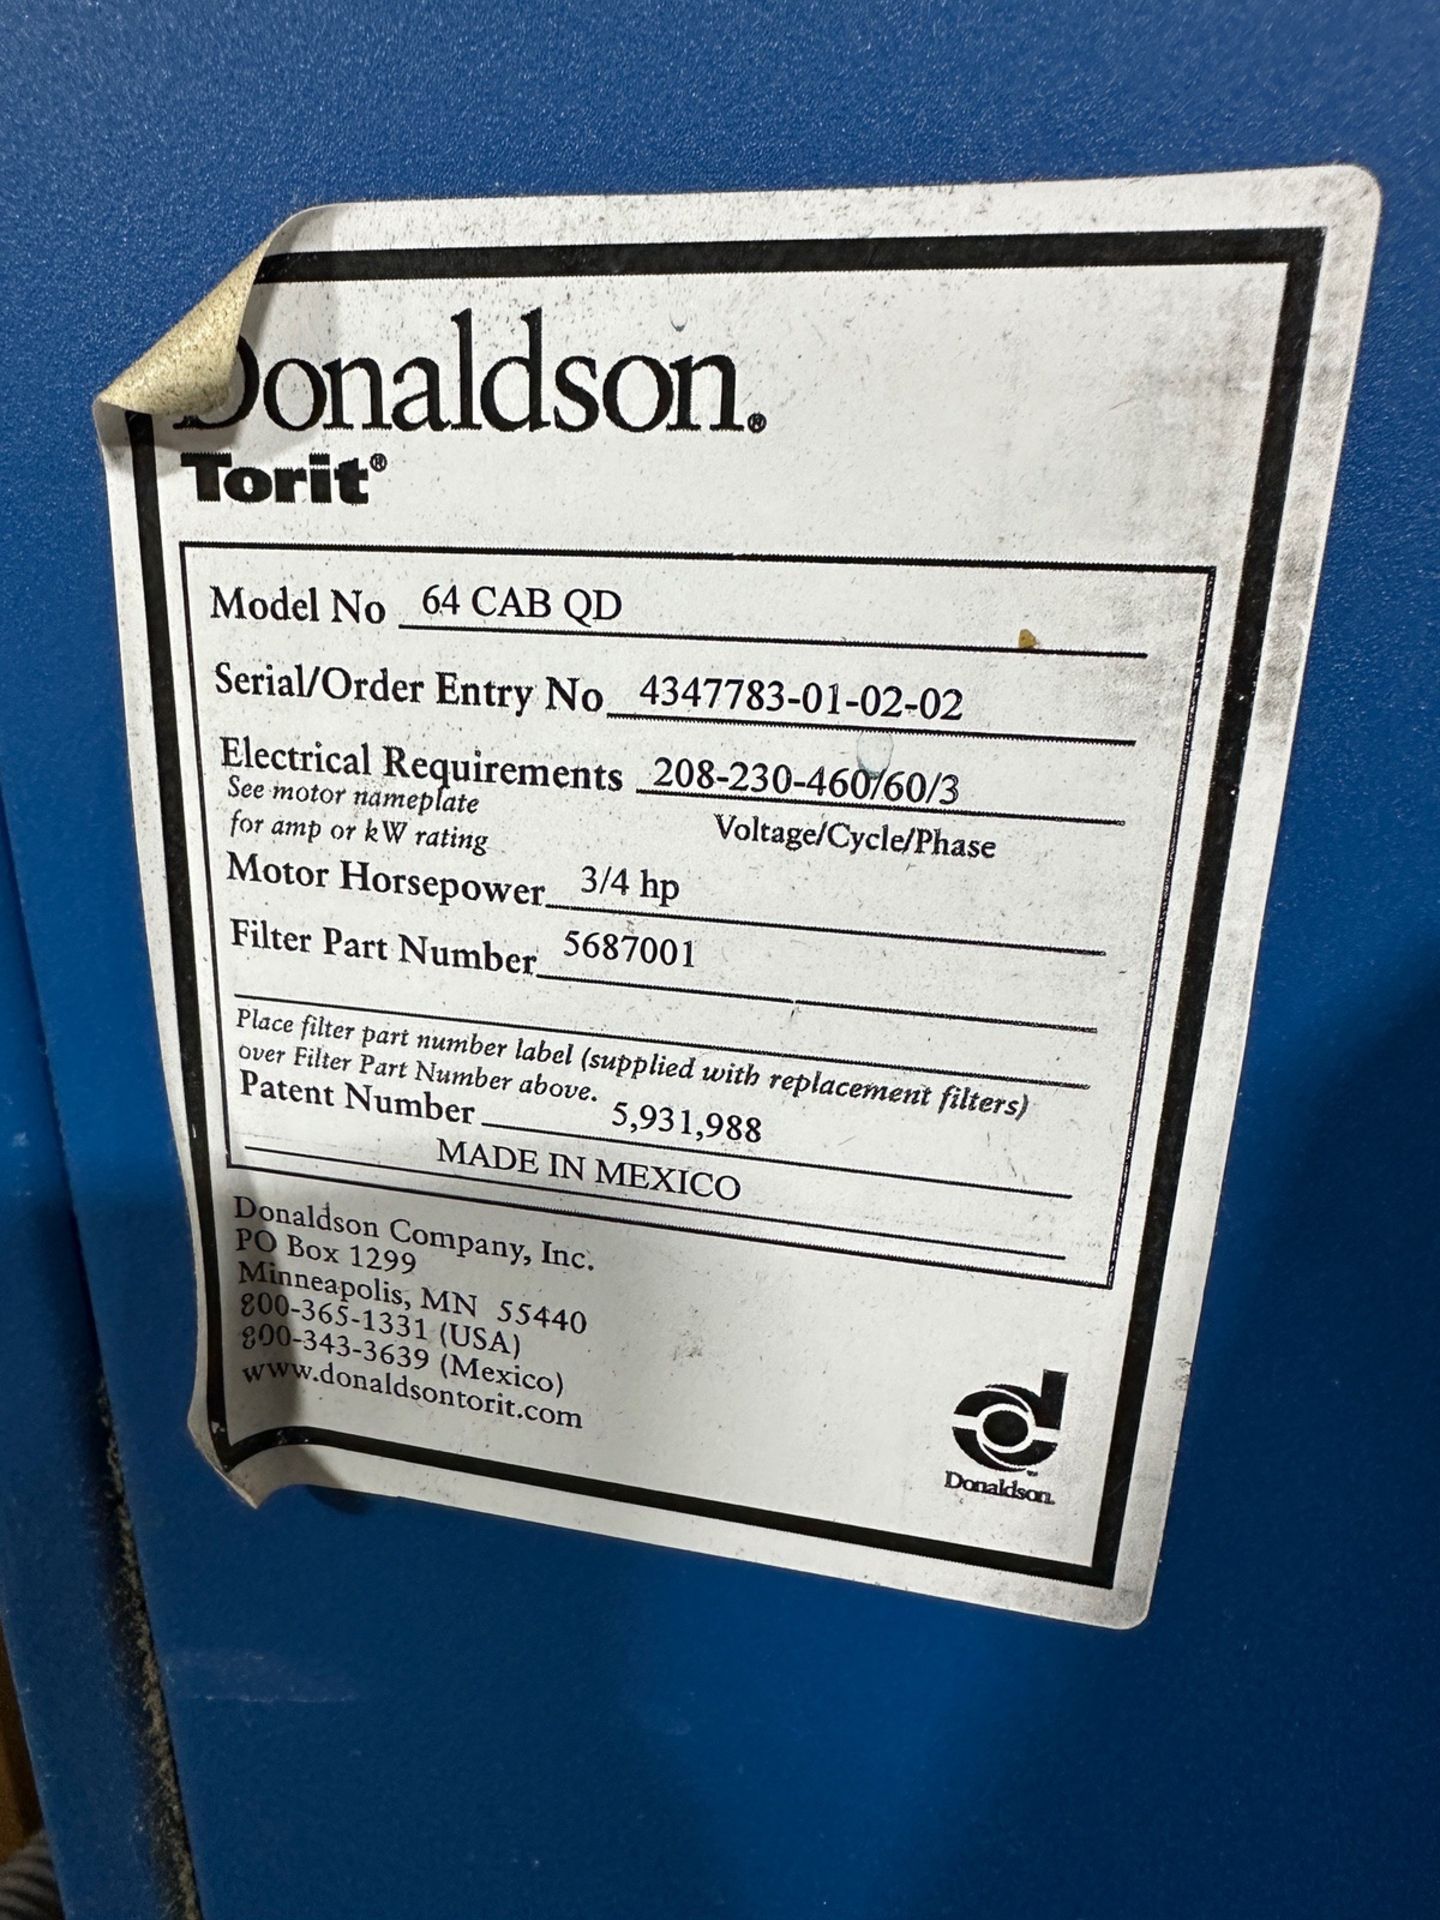 Donaldson Torit Cabinet Dust Collector - Model 64 CAB QD, S/N 4347783-01-02-02 | Rig Fee $200 - Image 3 of 3